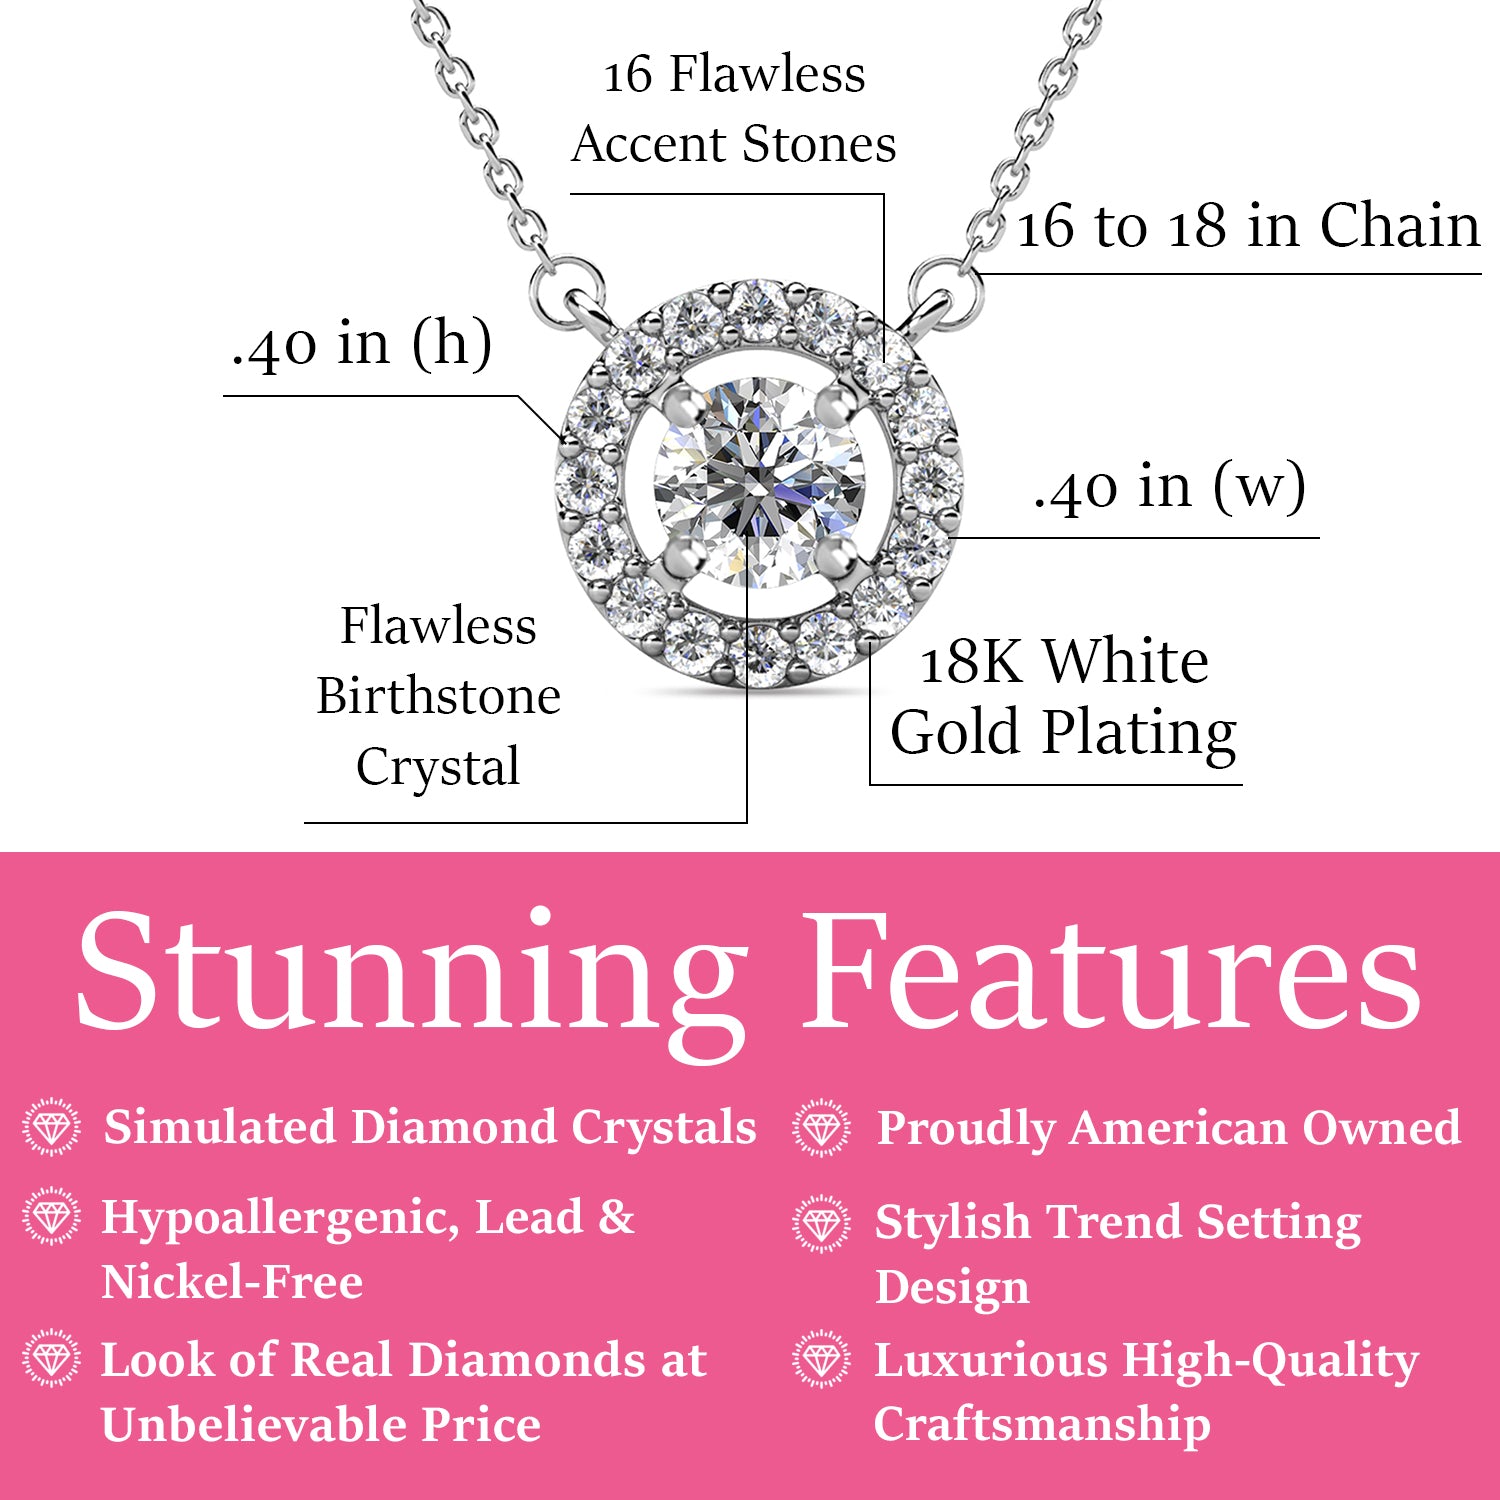 Royal April Birthstone Diamond Necklace, 18k White Gold Plated Silver Halo Necklace with Round Cut Crystal